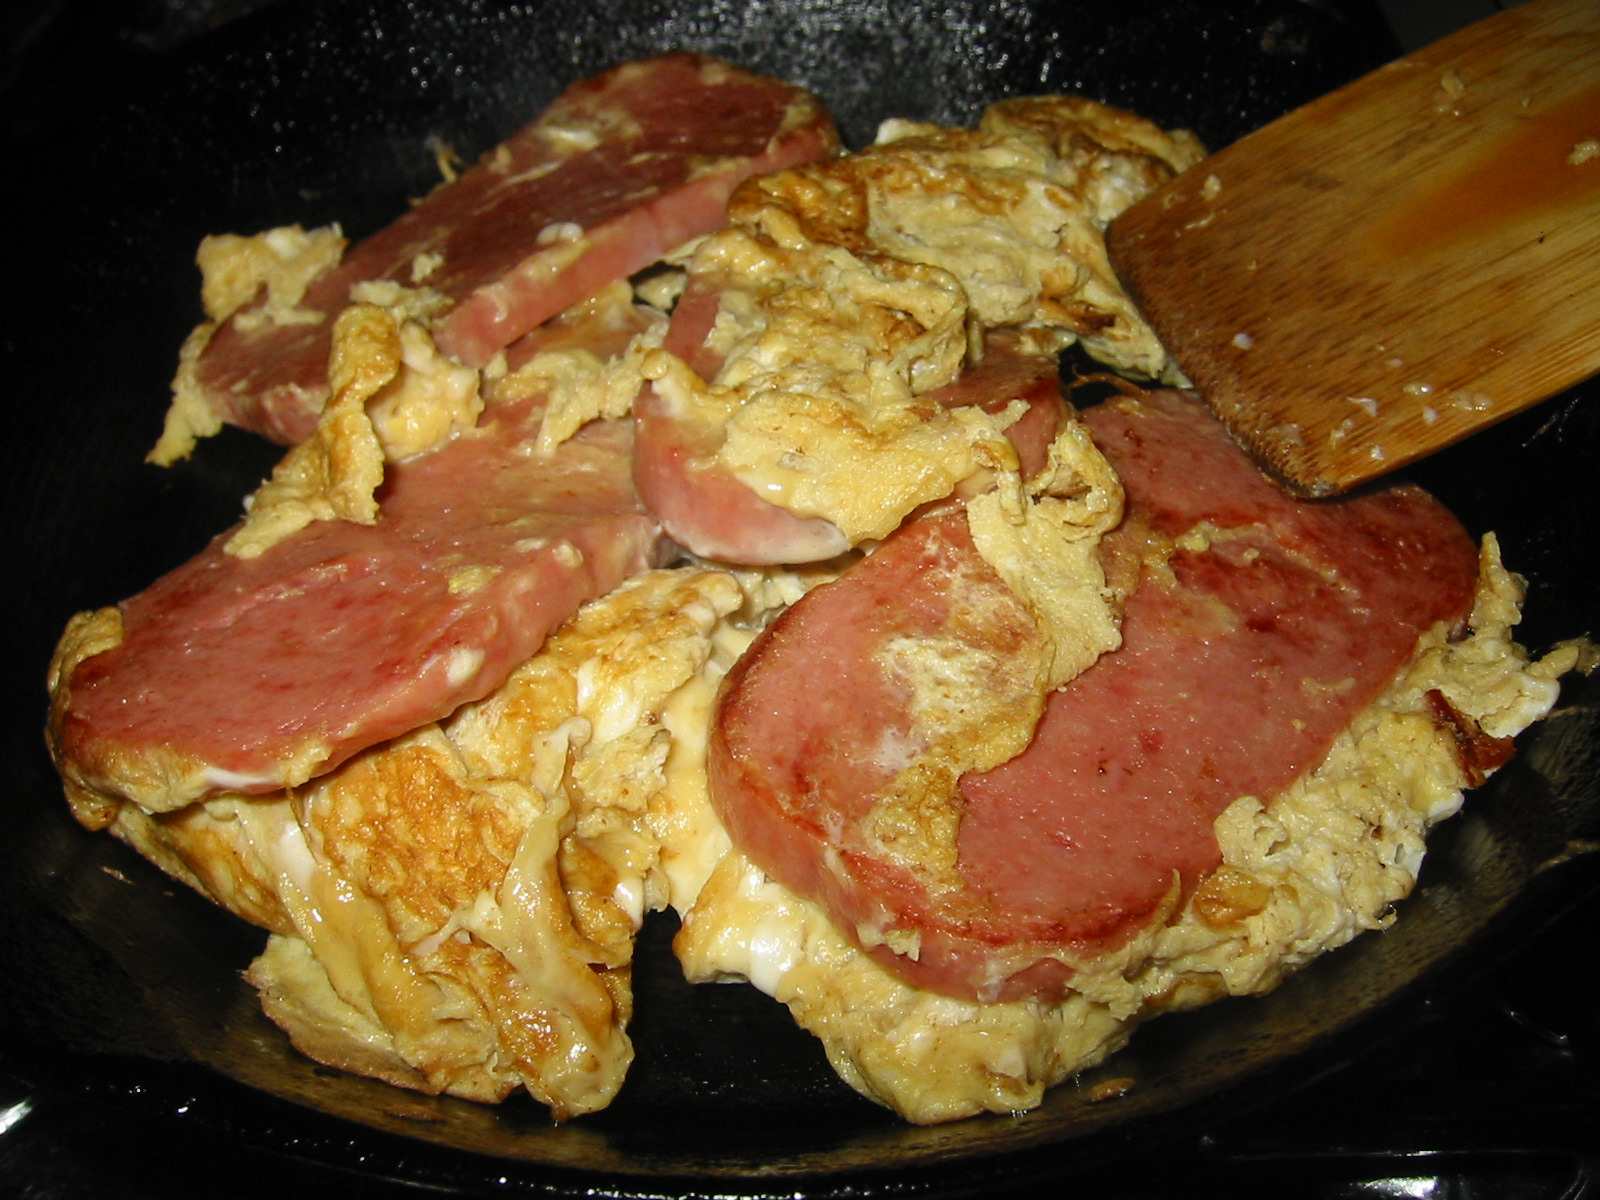 Fried SPAM and egg